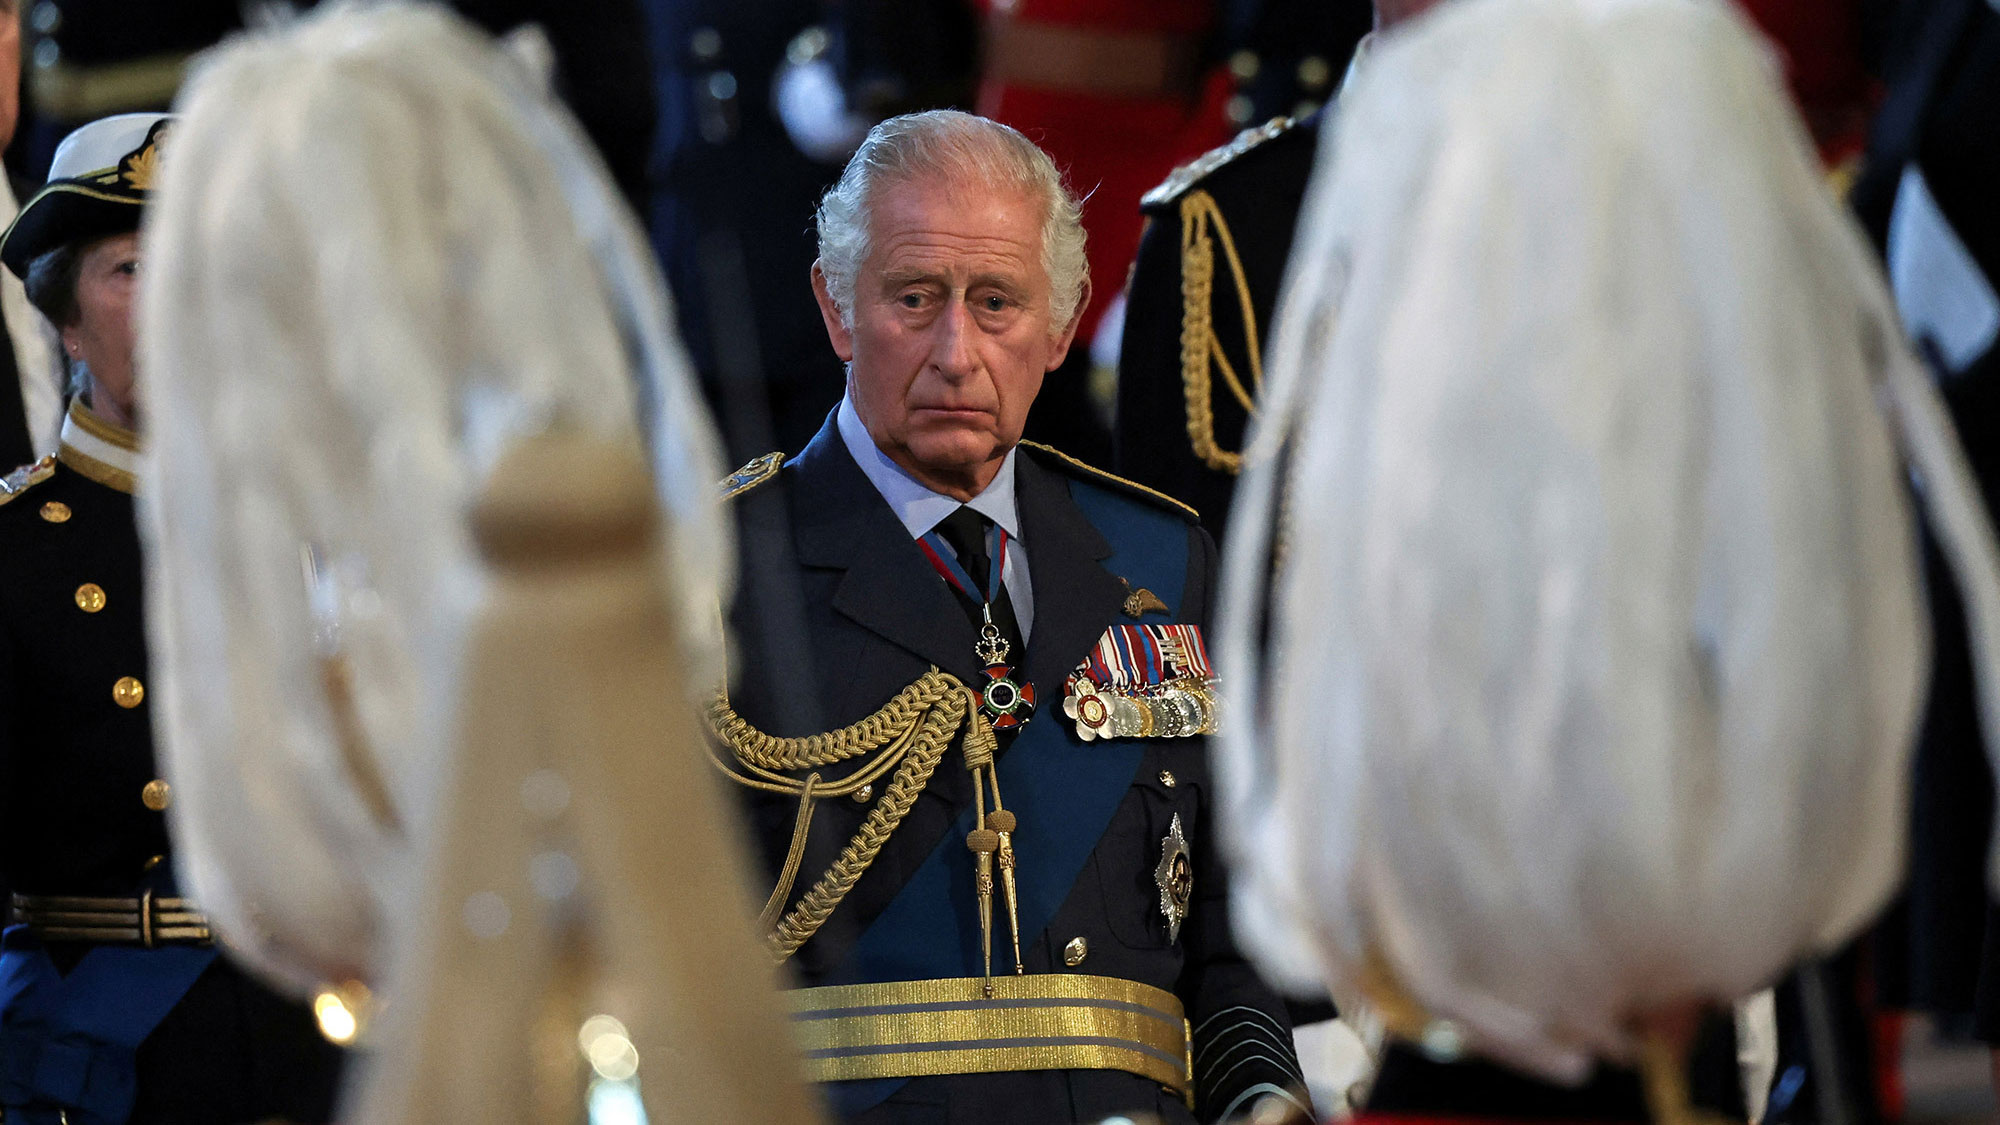 The King watches his mother's coffin arrive at Westminster Hall.